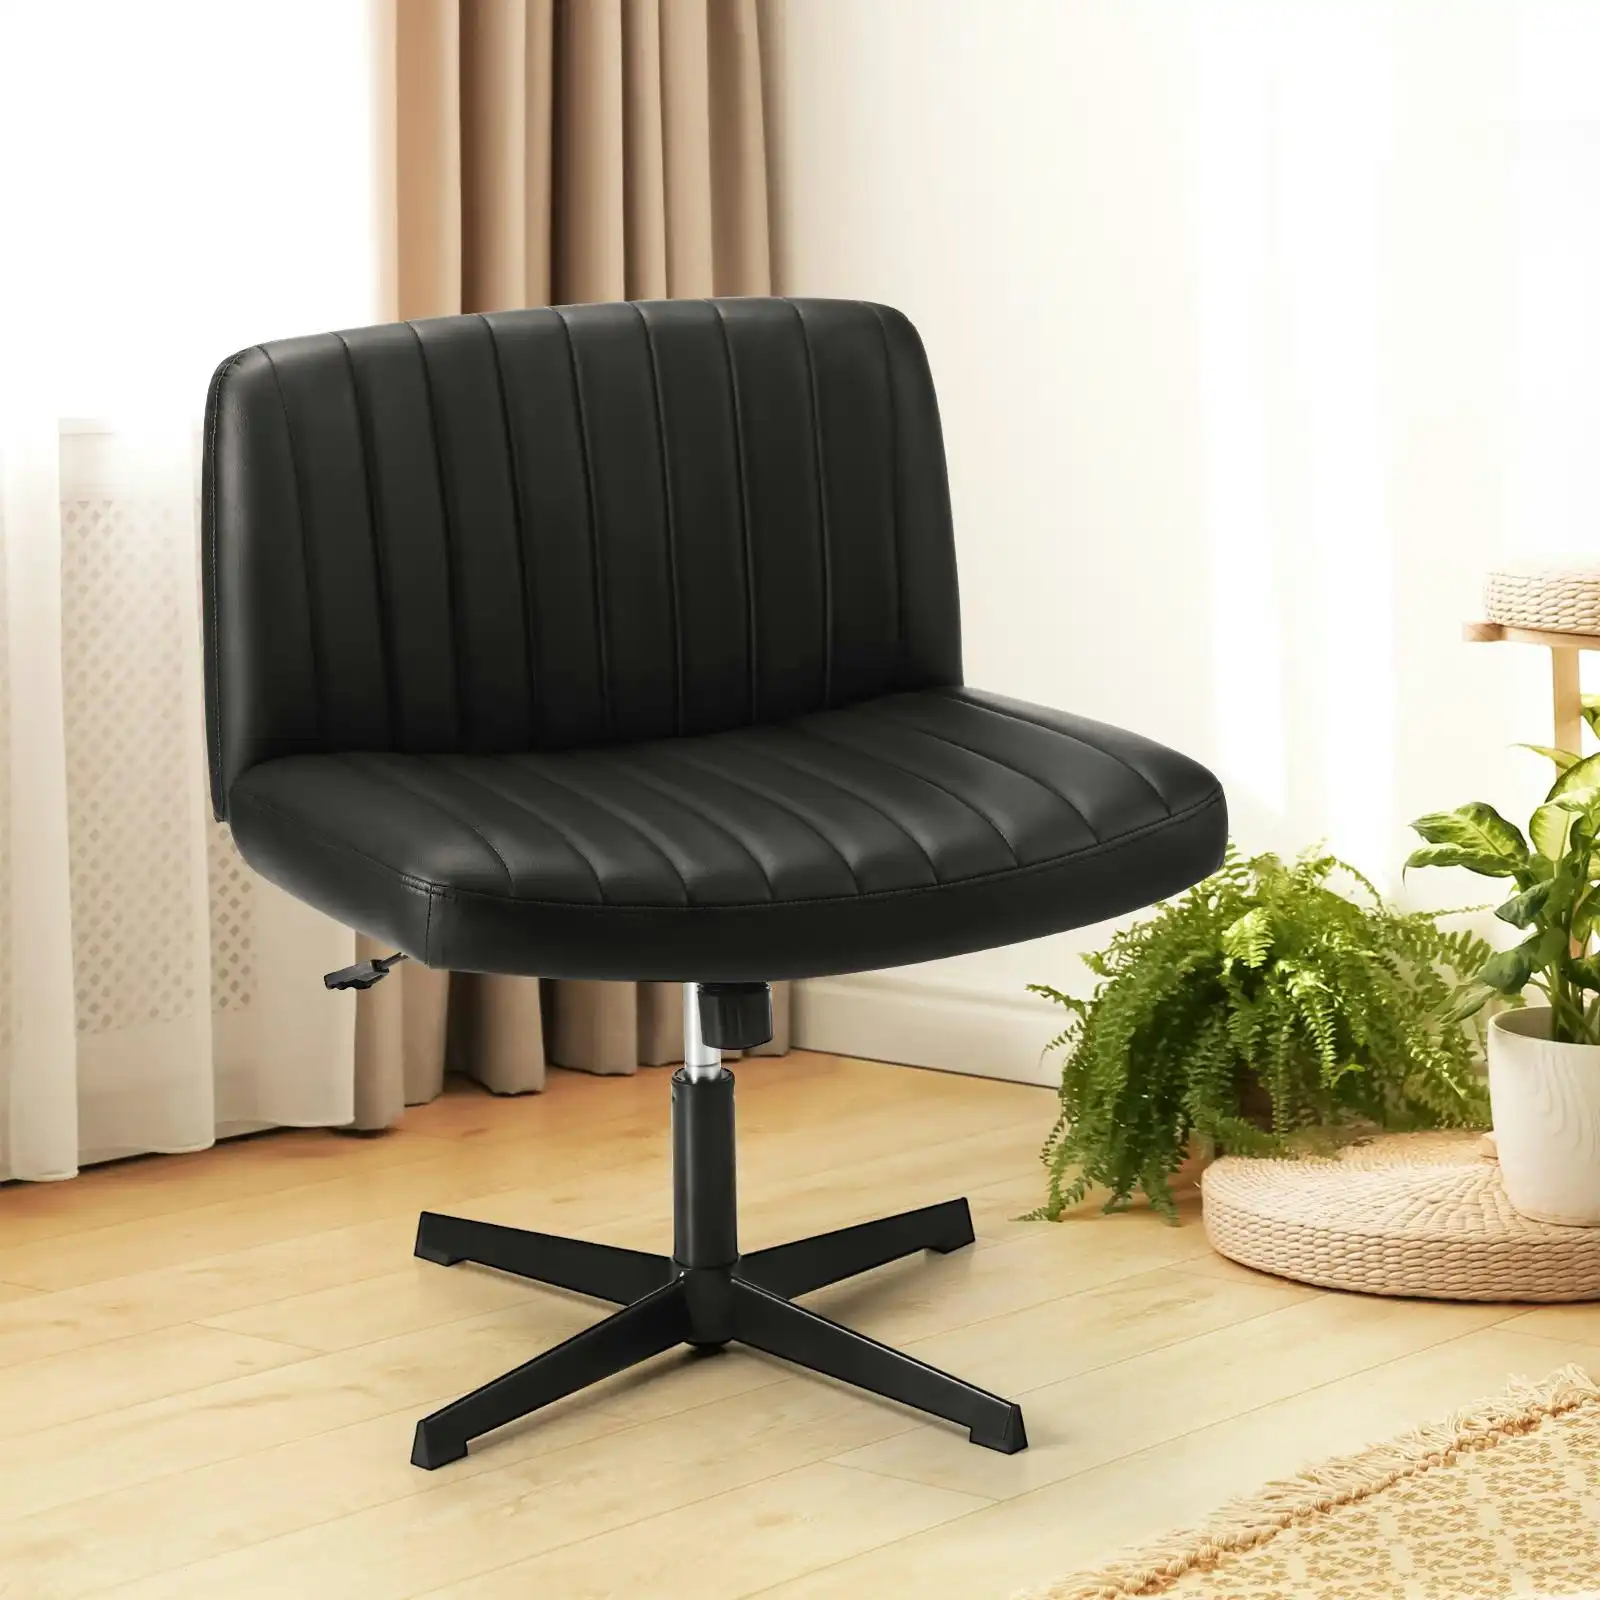 Oikiture Mid Back Armless Office Desk Chair Wide Seat PU Leather Black